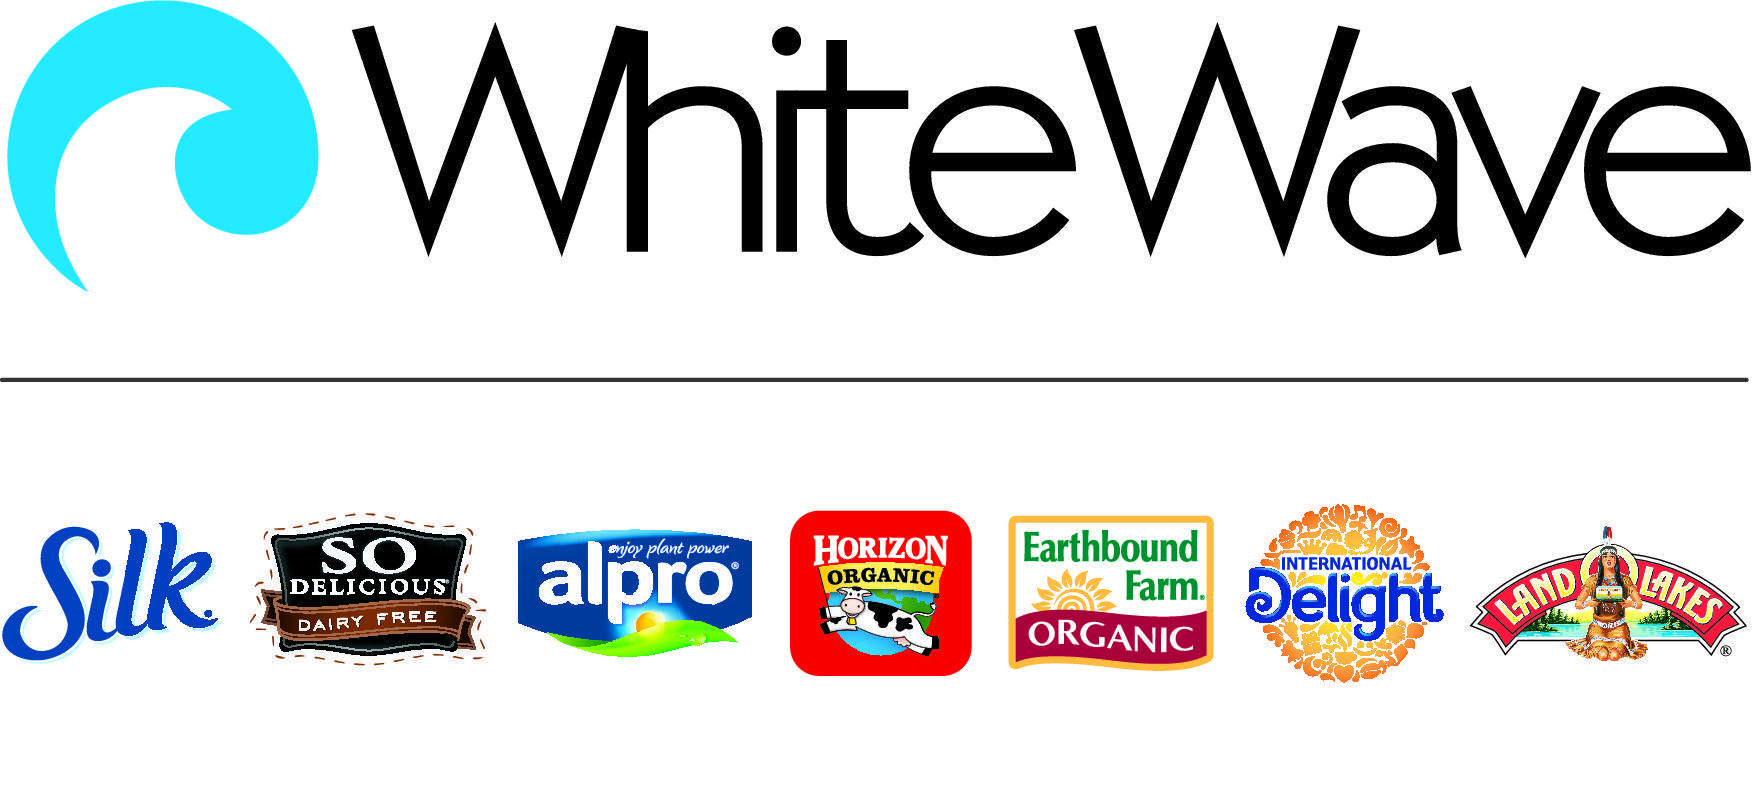 WhiteWave Logo - Small Cap WhiteWave Foods Q4 Earnings Report: Ride the Wave? : Article